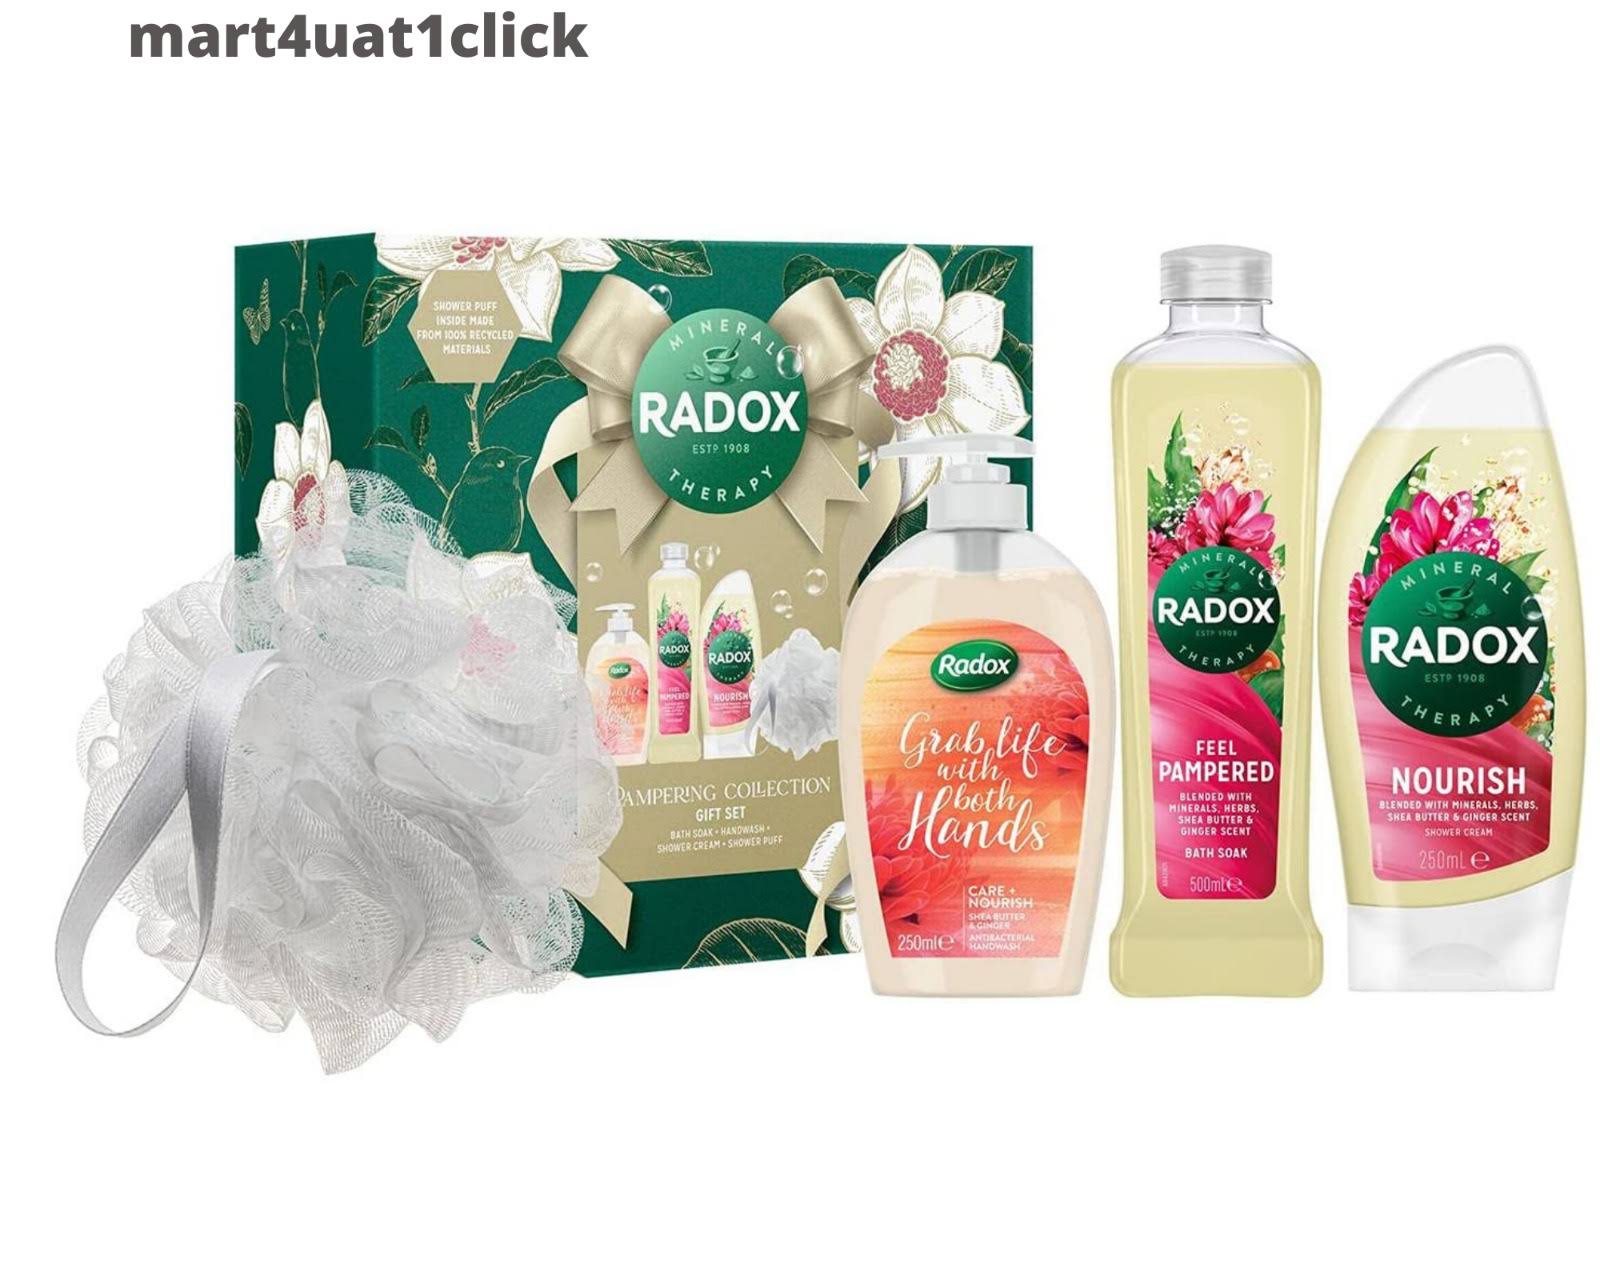 Radox Pampering Collection Gift Set